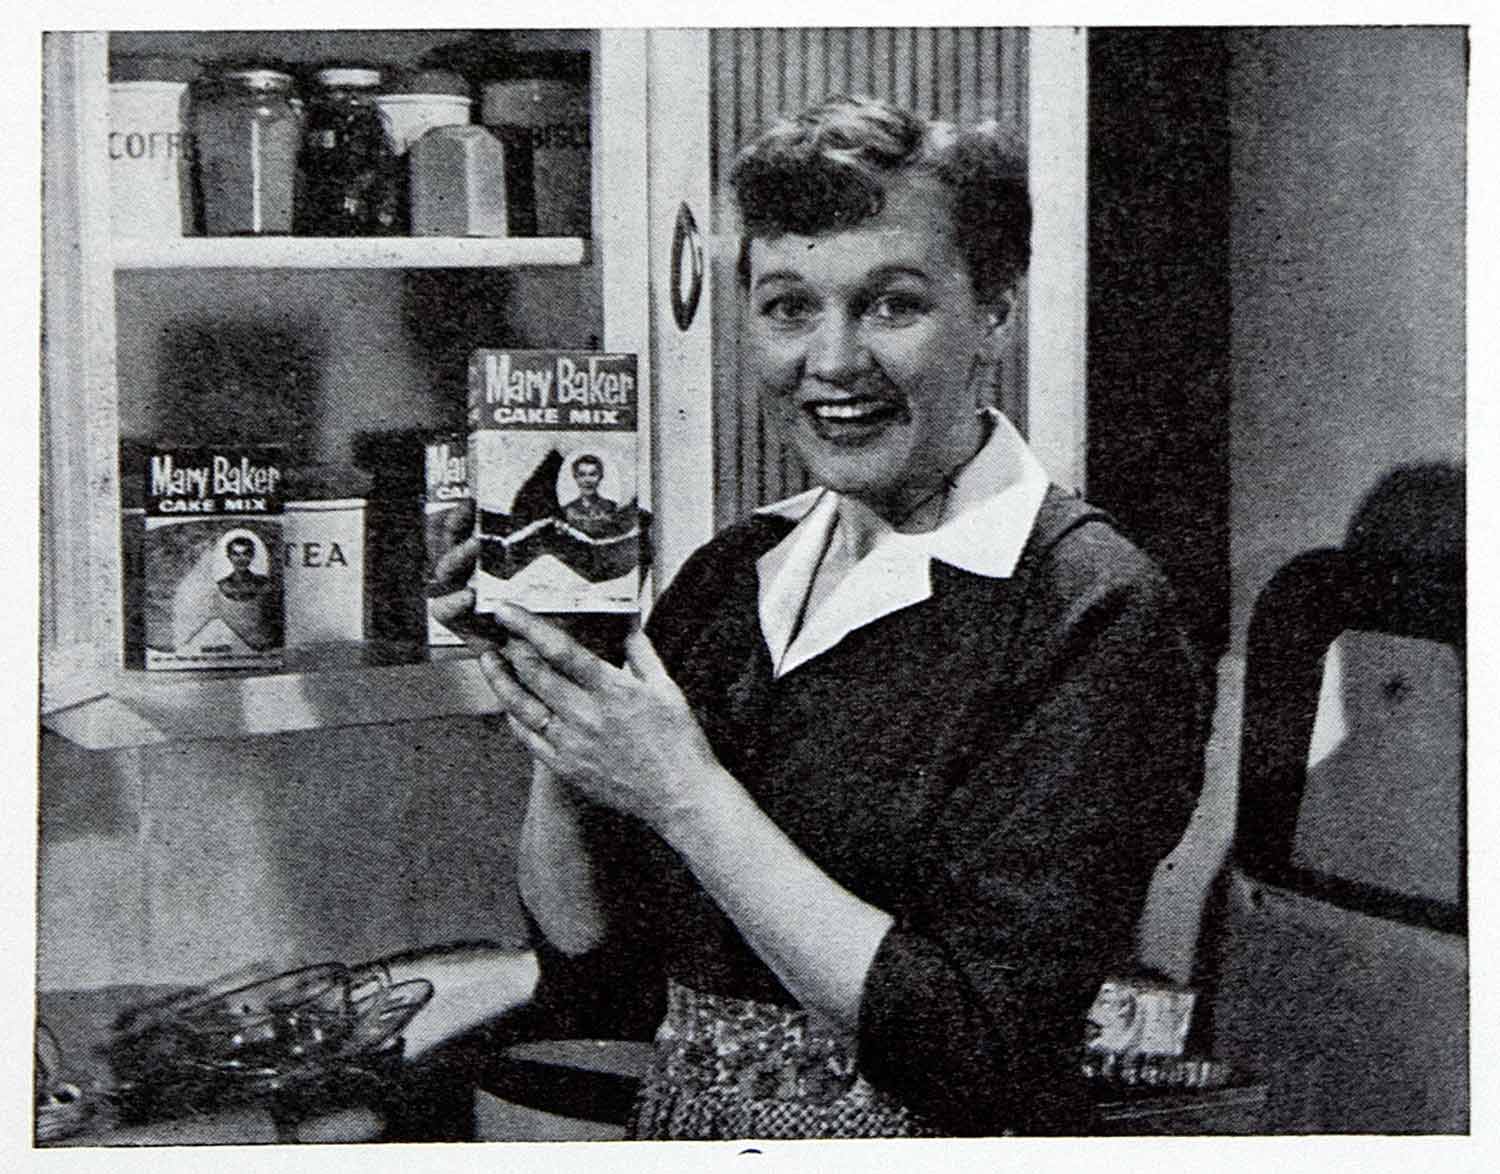 1956 Print Mary Baker Cake Mix Commercial Housewife Rosamund John English VEN7